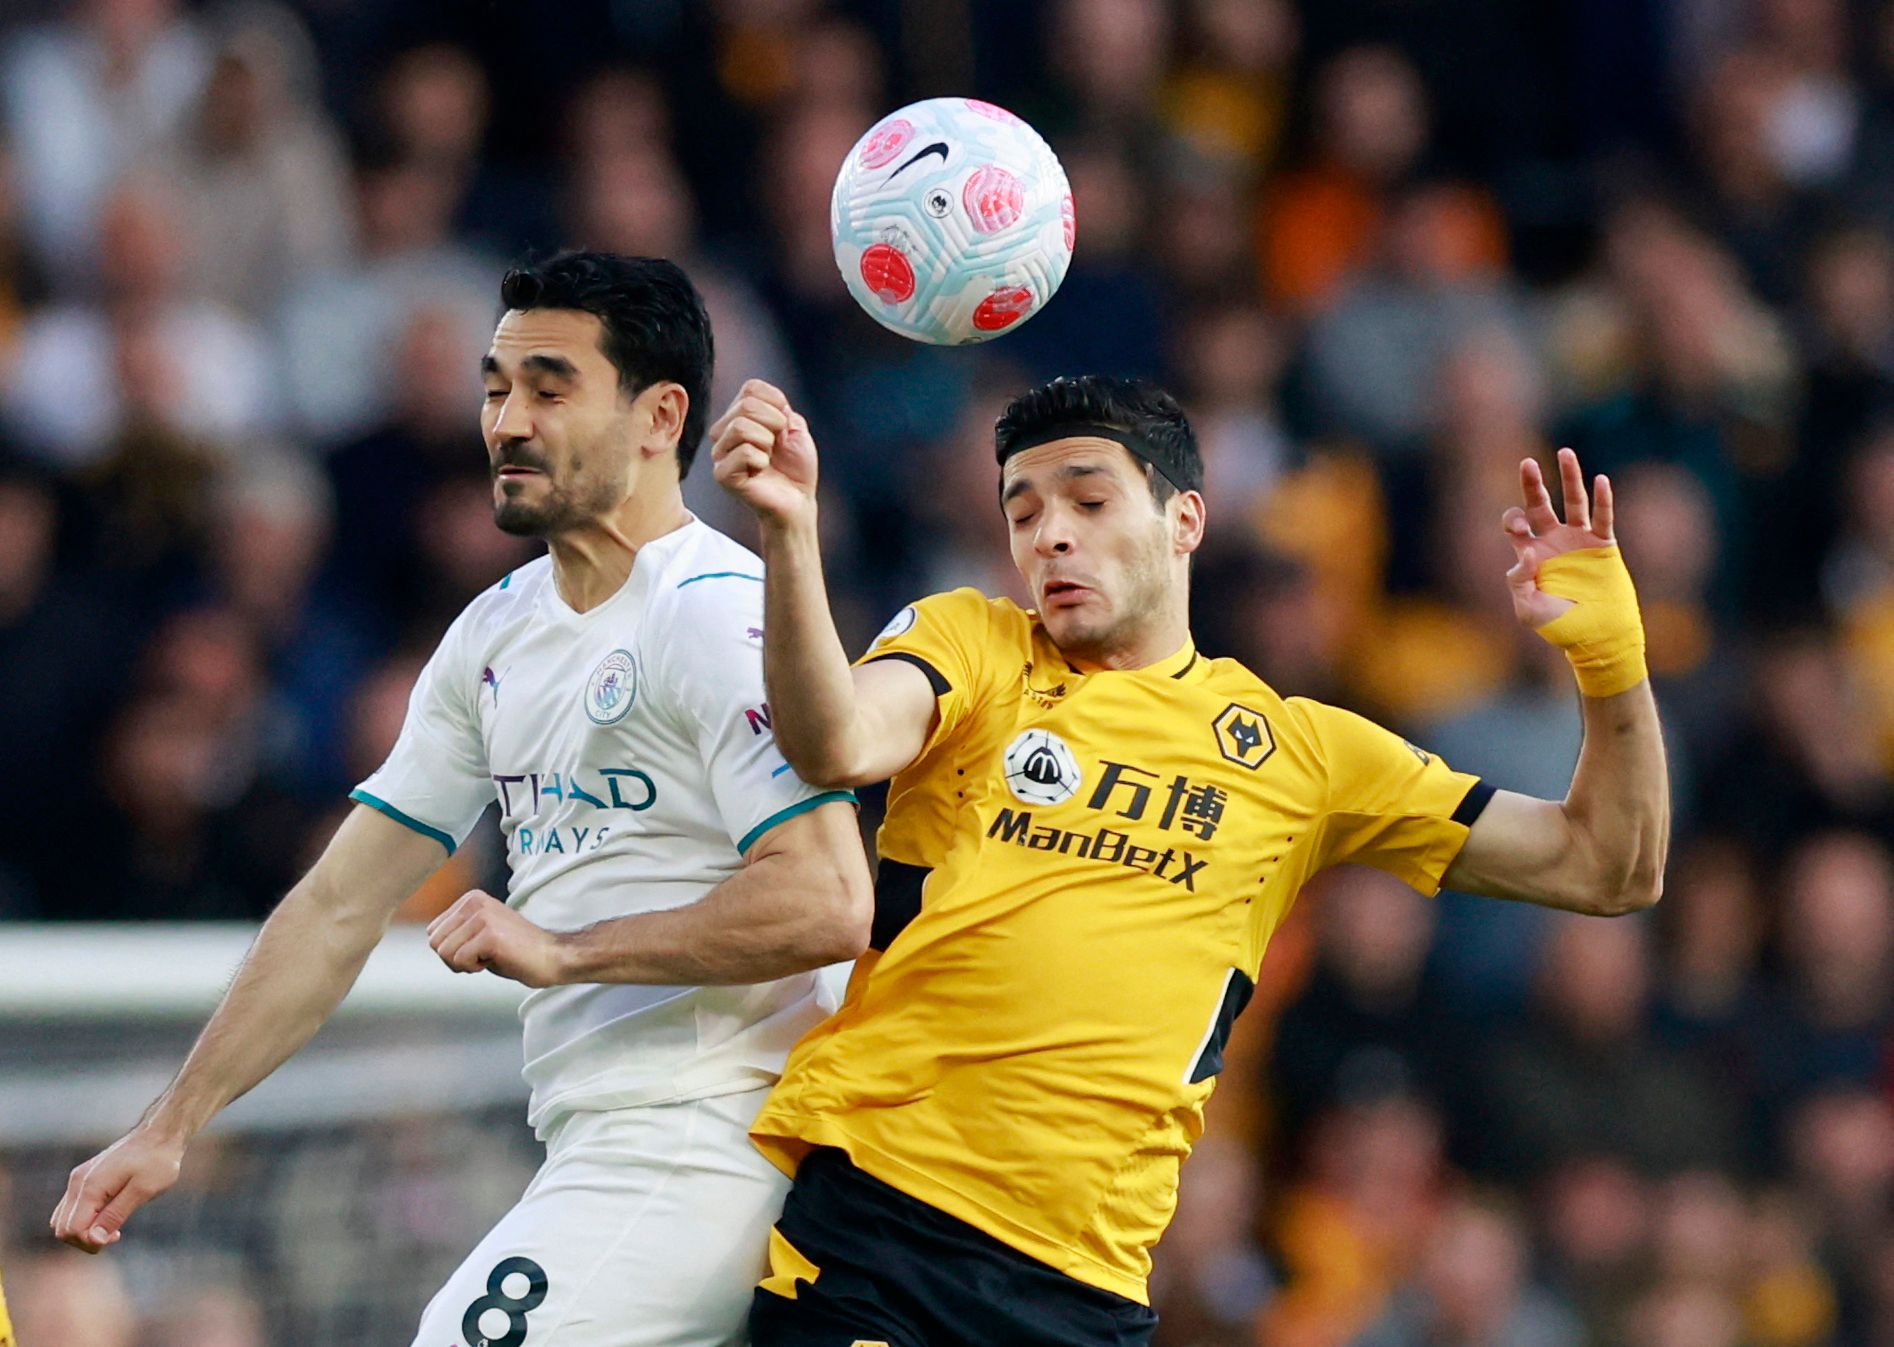 raul-jimenez-wolverhampton-wanderers-wolves-transfer-news-jimenez-exit-crook-talksport-lage-gibbs-white-premier-leagueSoccer Football - Premier League - Wolverhampton Wanderers v Manchester City - Molineux Stadium, Wolverhampton, Britain - May 11, 2022  Manchester City's Ilkay Gundogan in action with Wolverhampton Wanderers' Raul Jimenez Action Images via Reuters/Peter Cziborra EDITORIAL USE ONLY. No use with unauthorized audio, video, data, fixture lists, club/league logos or 'live' services. O